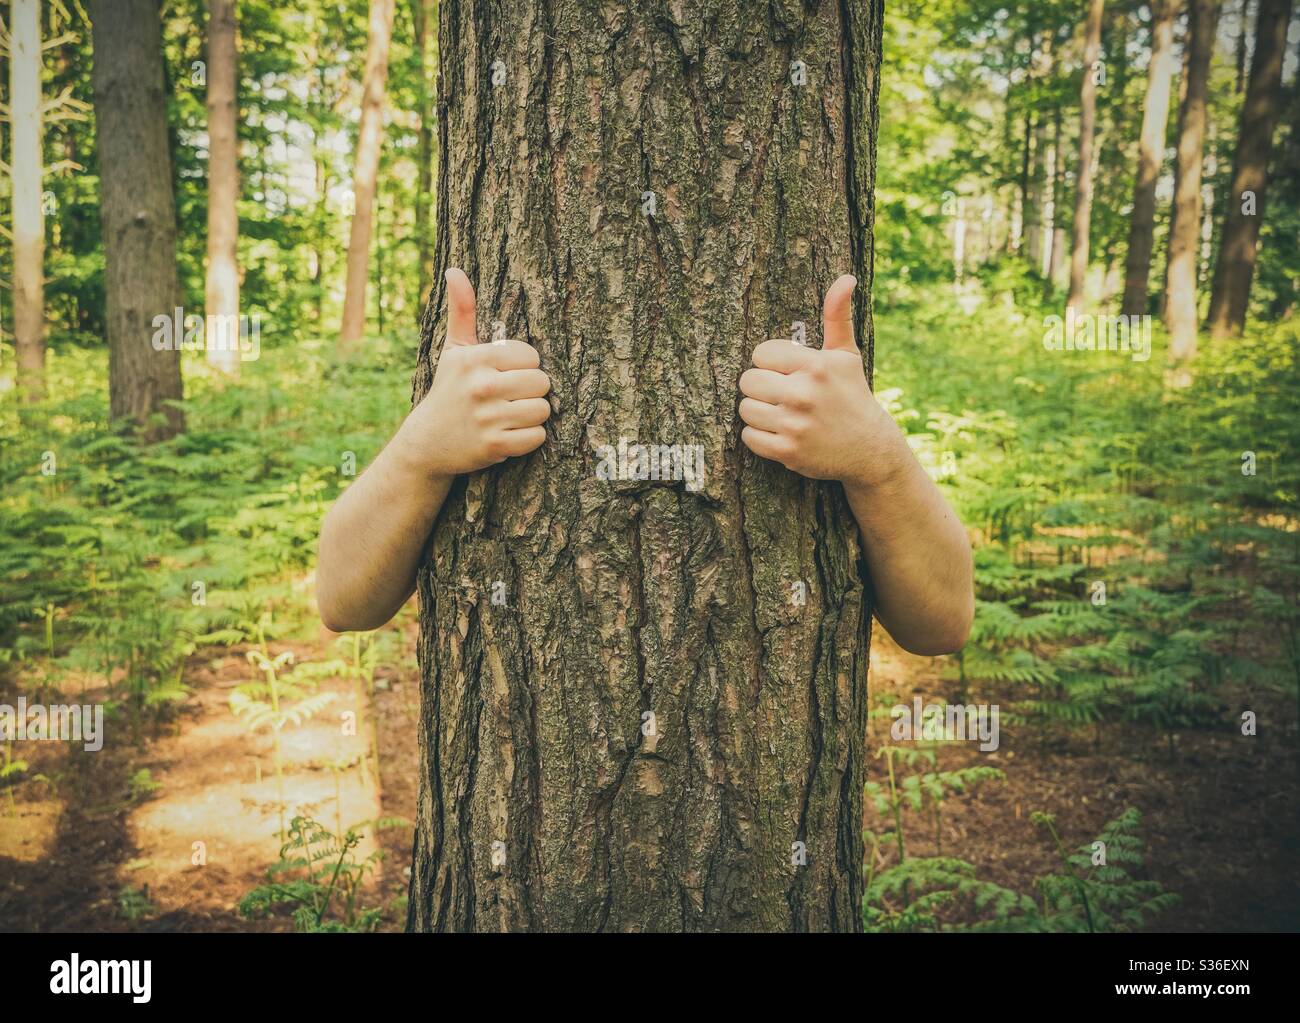 A funny nature image of a tree with human arms giving a positive gesture of thumbs up to conservation and ecology Stock Photo